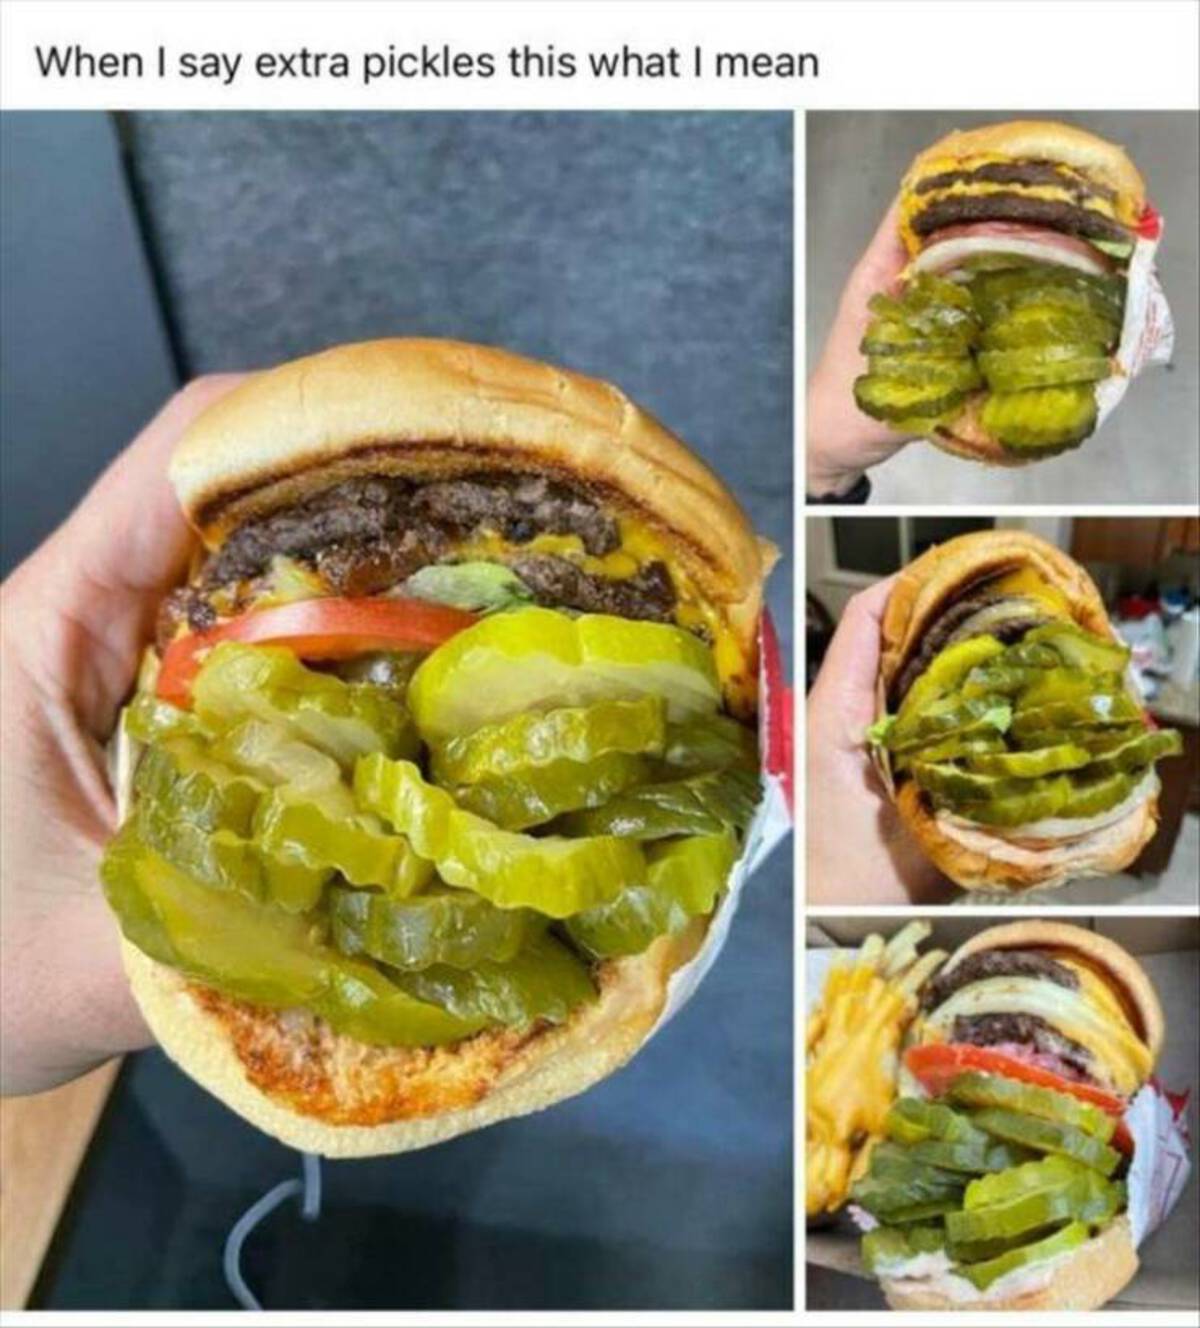 burger with extra pickles - When I say extra pickles this what I mean